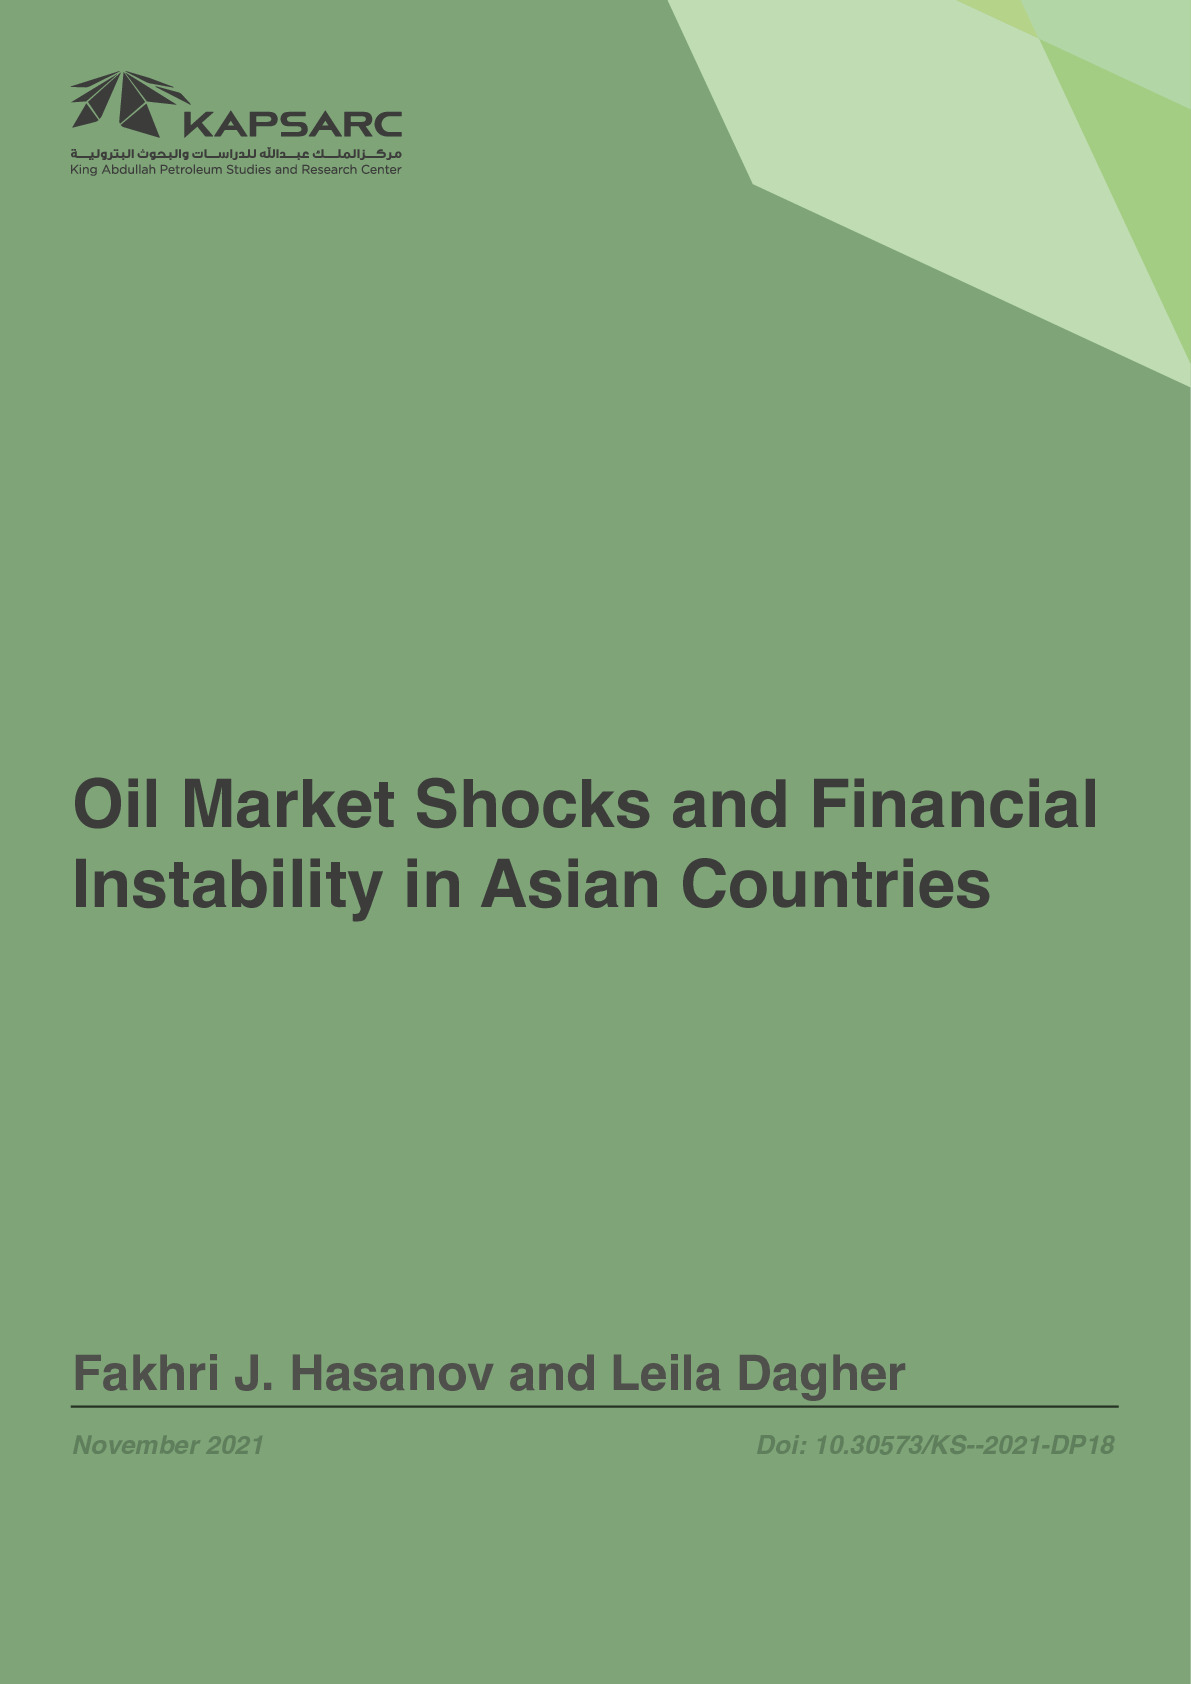 Oil Market Shocks and Financial Instability in Asian Countries